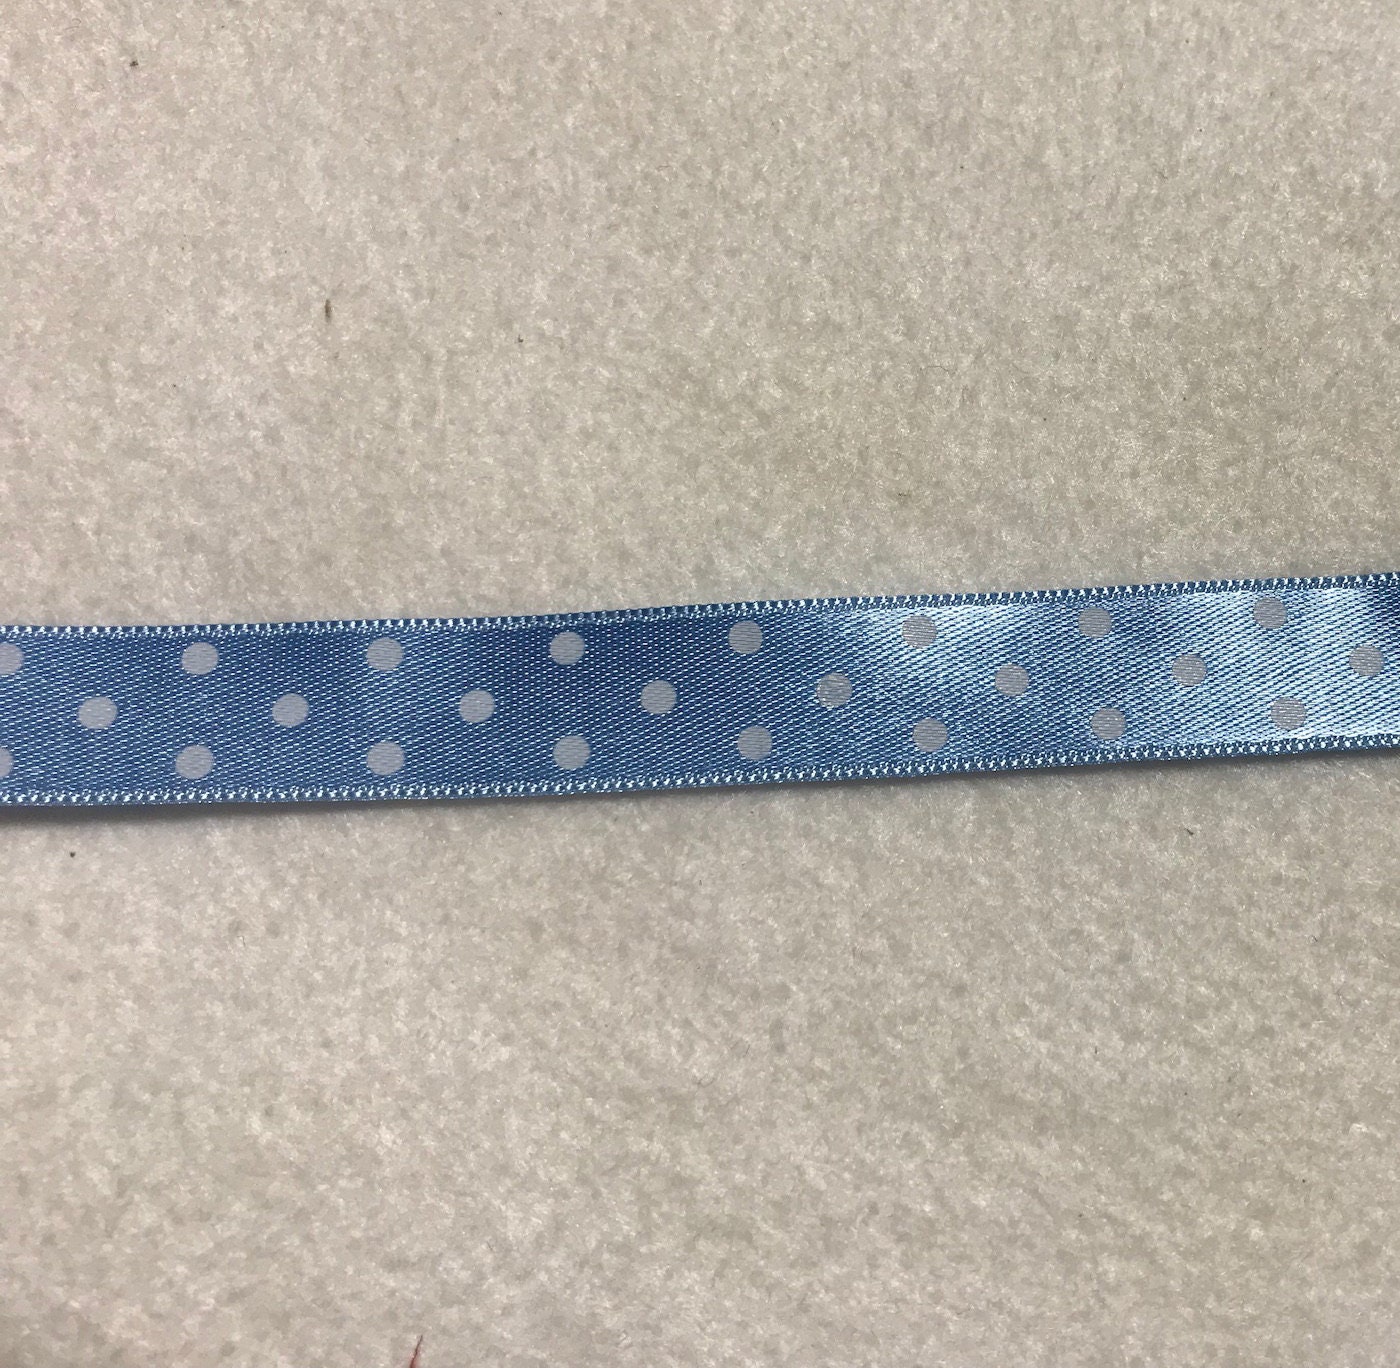 Iridescent Pearl Sequin Ribbon (1/4 wide - 5 Yards)